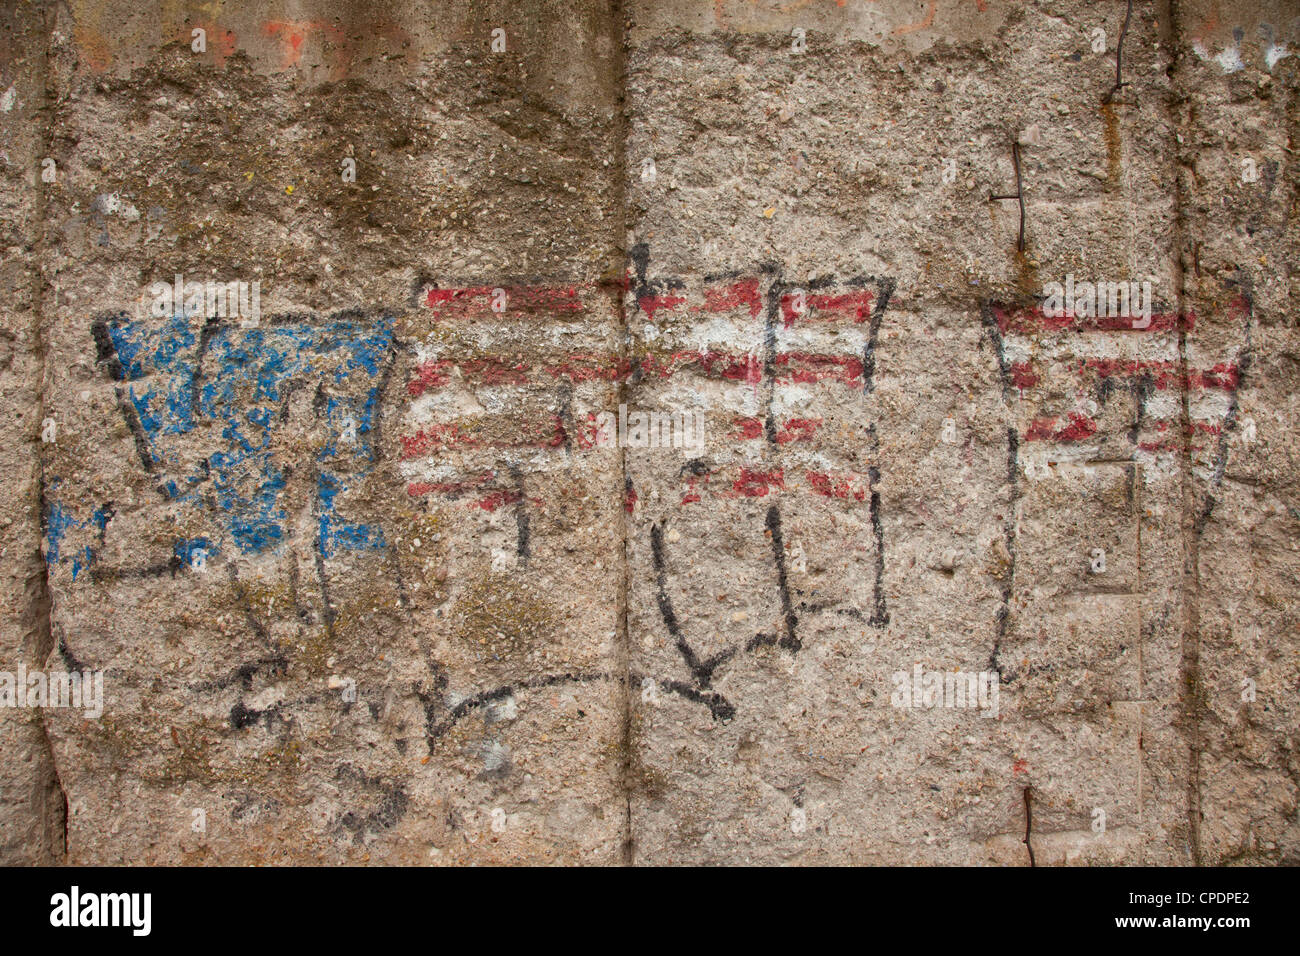 Worn graffiti on the Berlin Wall at the Topography of Terror. Berlin, Germany. Stock Photo